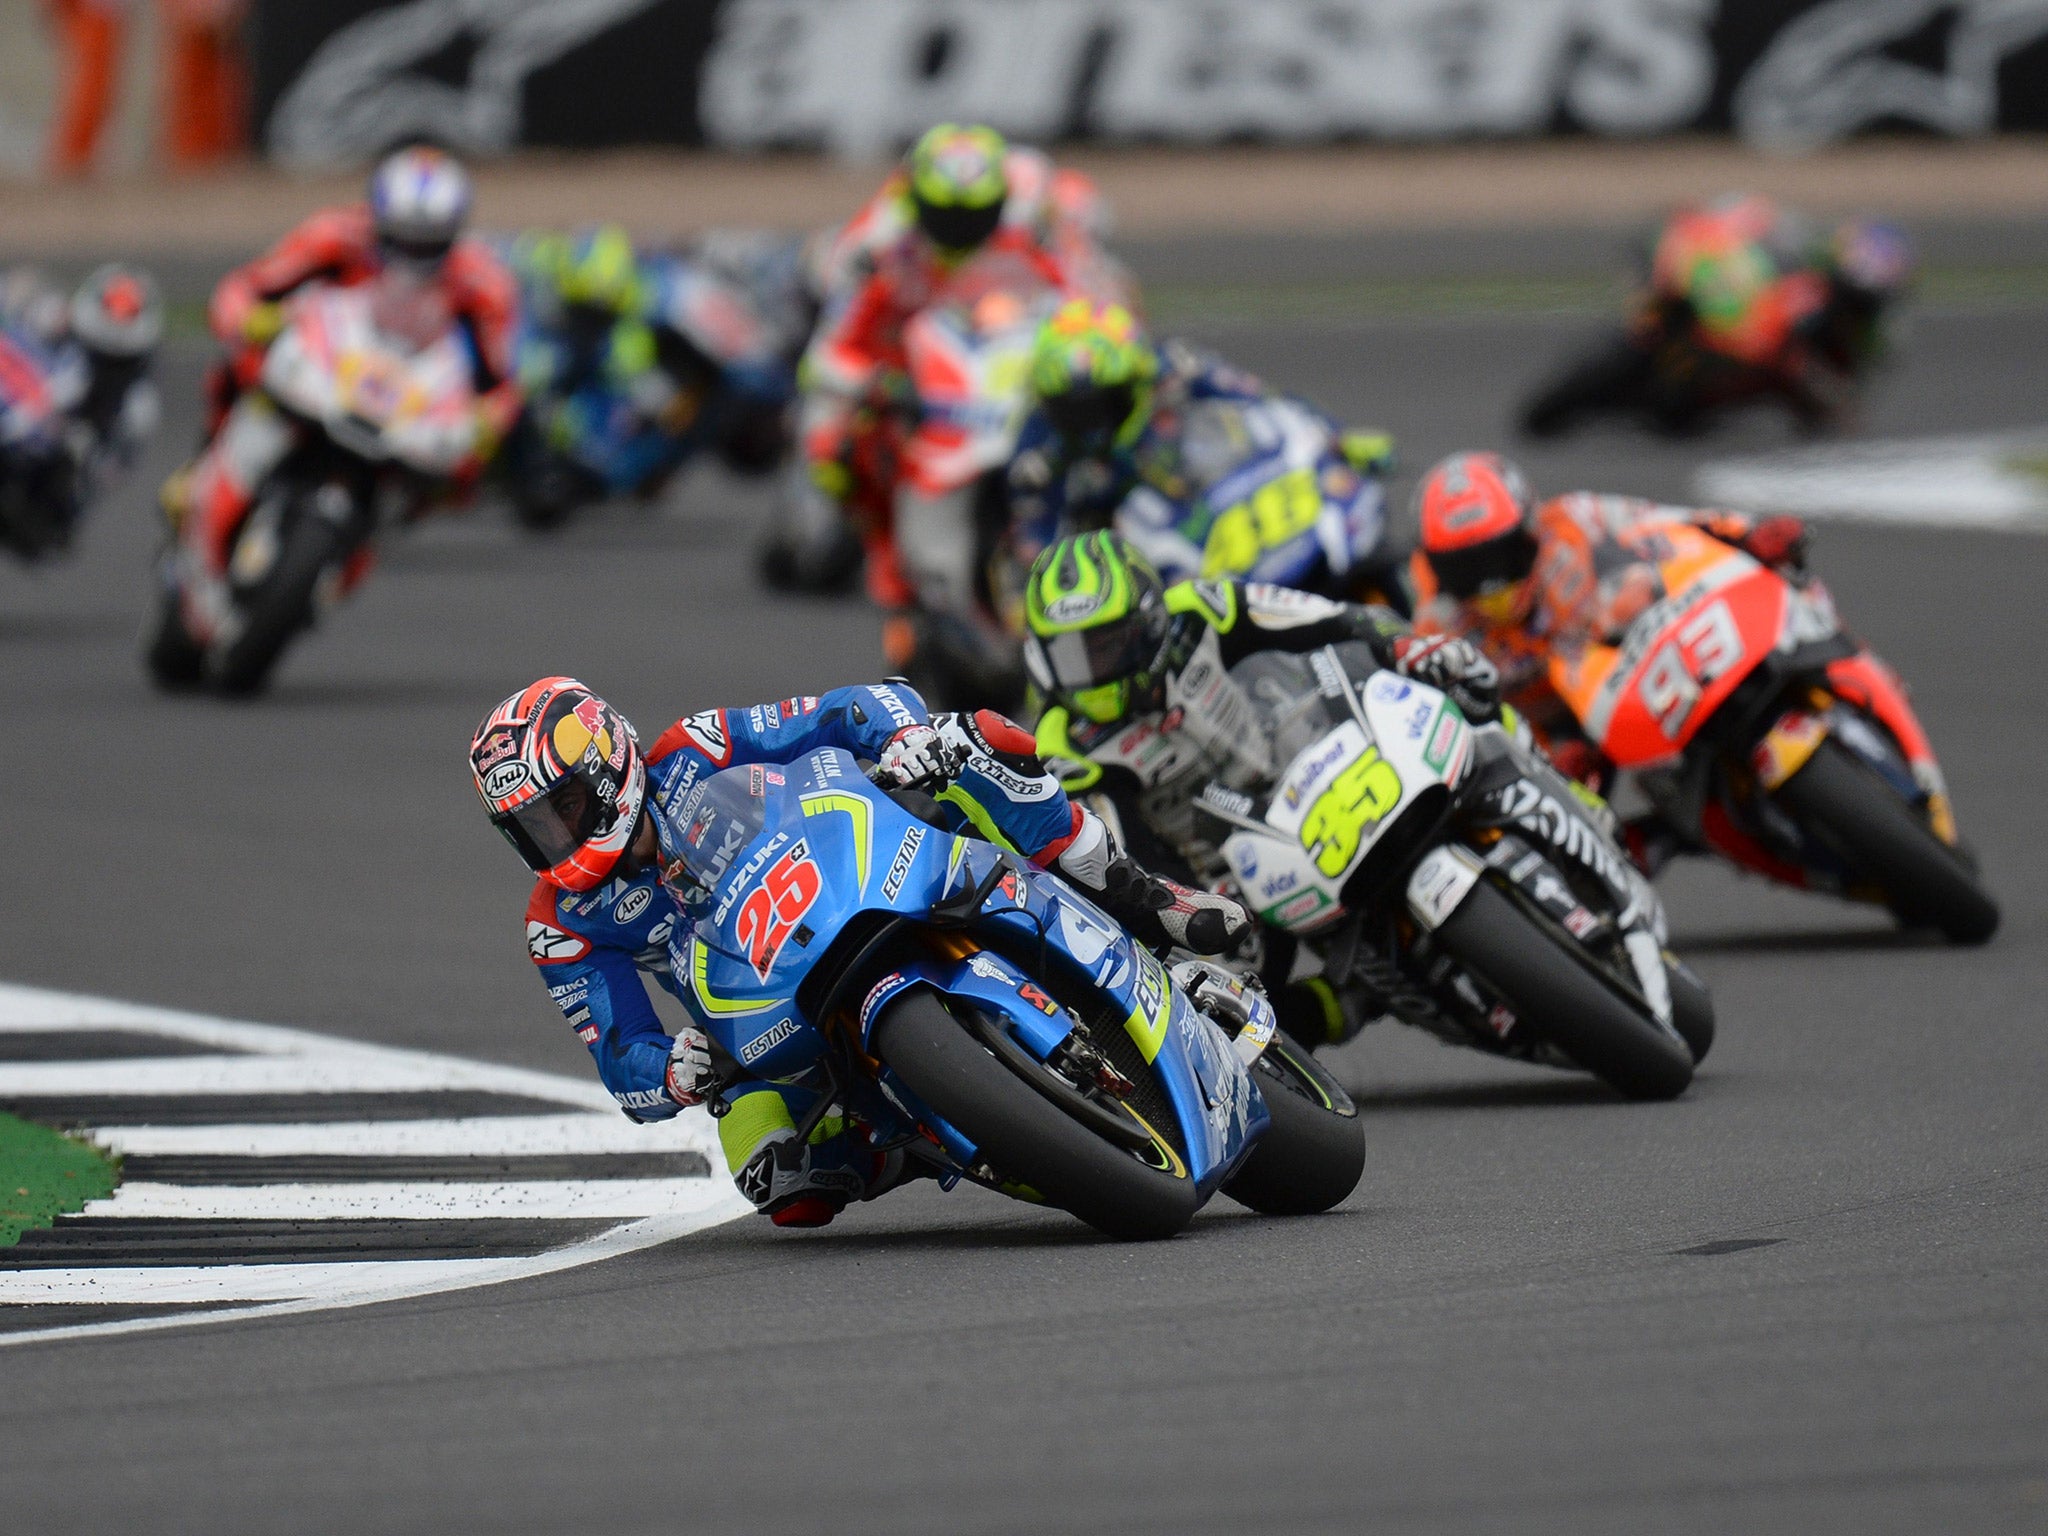 Maverick Vinales hit the front on the opening lap and never looked back